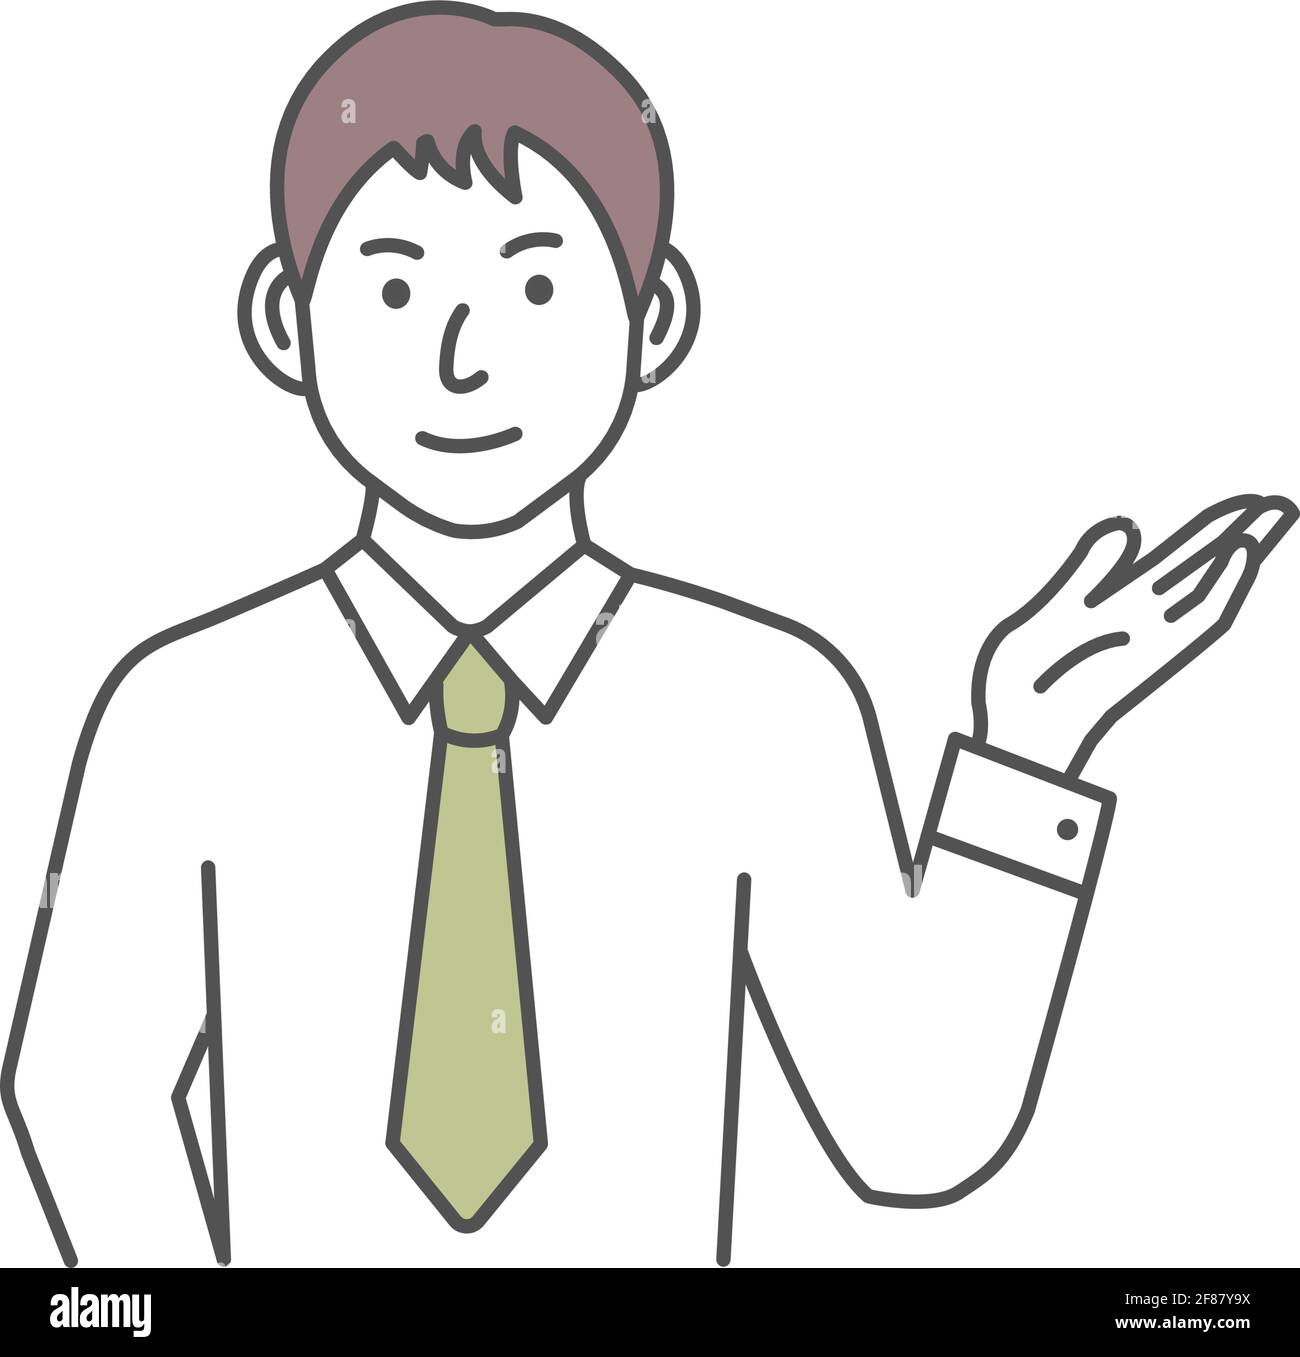 Vector illustration of a young businessman introducing or navigating Stock Vector